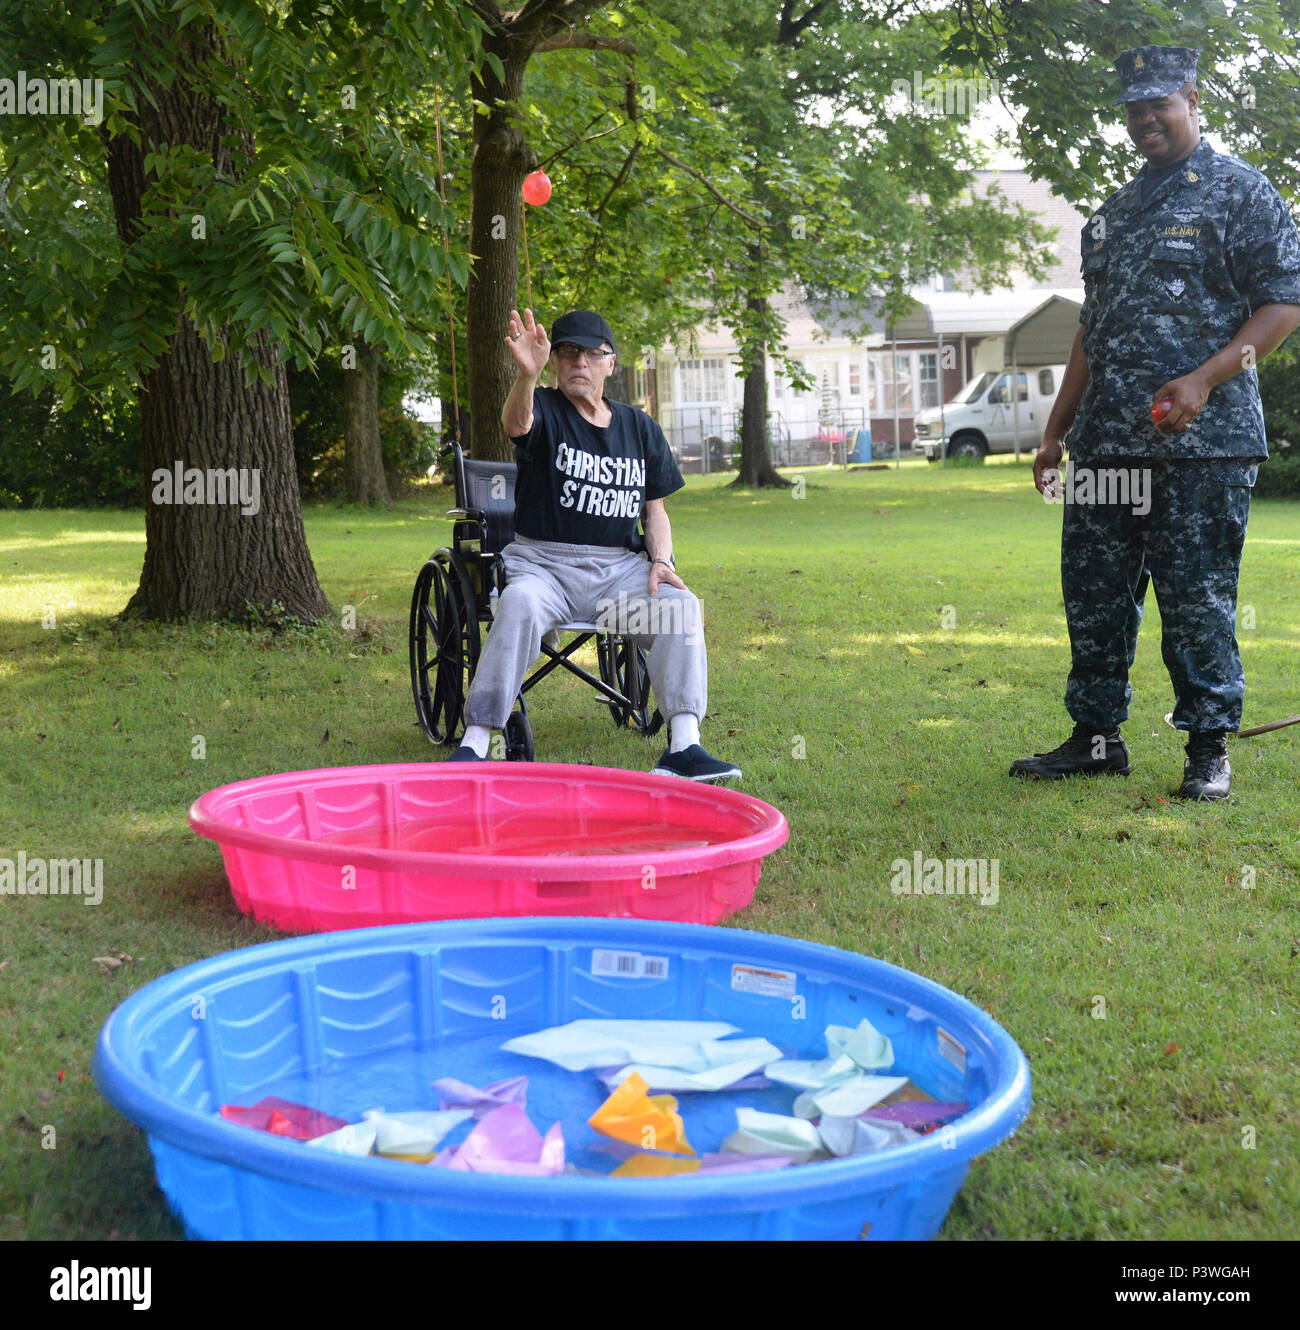 160722-N-FU443-017 NASHVILLE (July 22, 2016) Chief Aviation Boatswain’s Mate (Handling) Mario Johnson assists during an outdoor game where residents attempted to sink paper battleships with squirt guns and water balloons at the Azalea Trace Assisted Living facility. Several members of Navy Recruiting District Nashville volunteered for the event in order to reach out to local members of the community. (U.S. Navy photo by Mass Communication Specialist 1st Class Timothy Walter/Released) Stock Photo